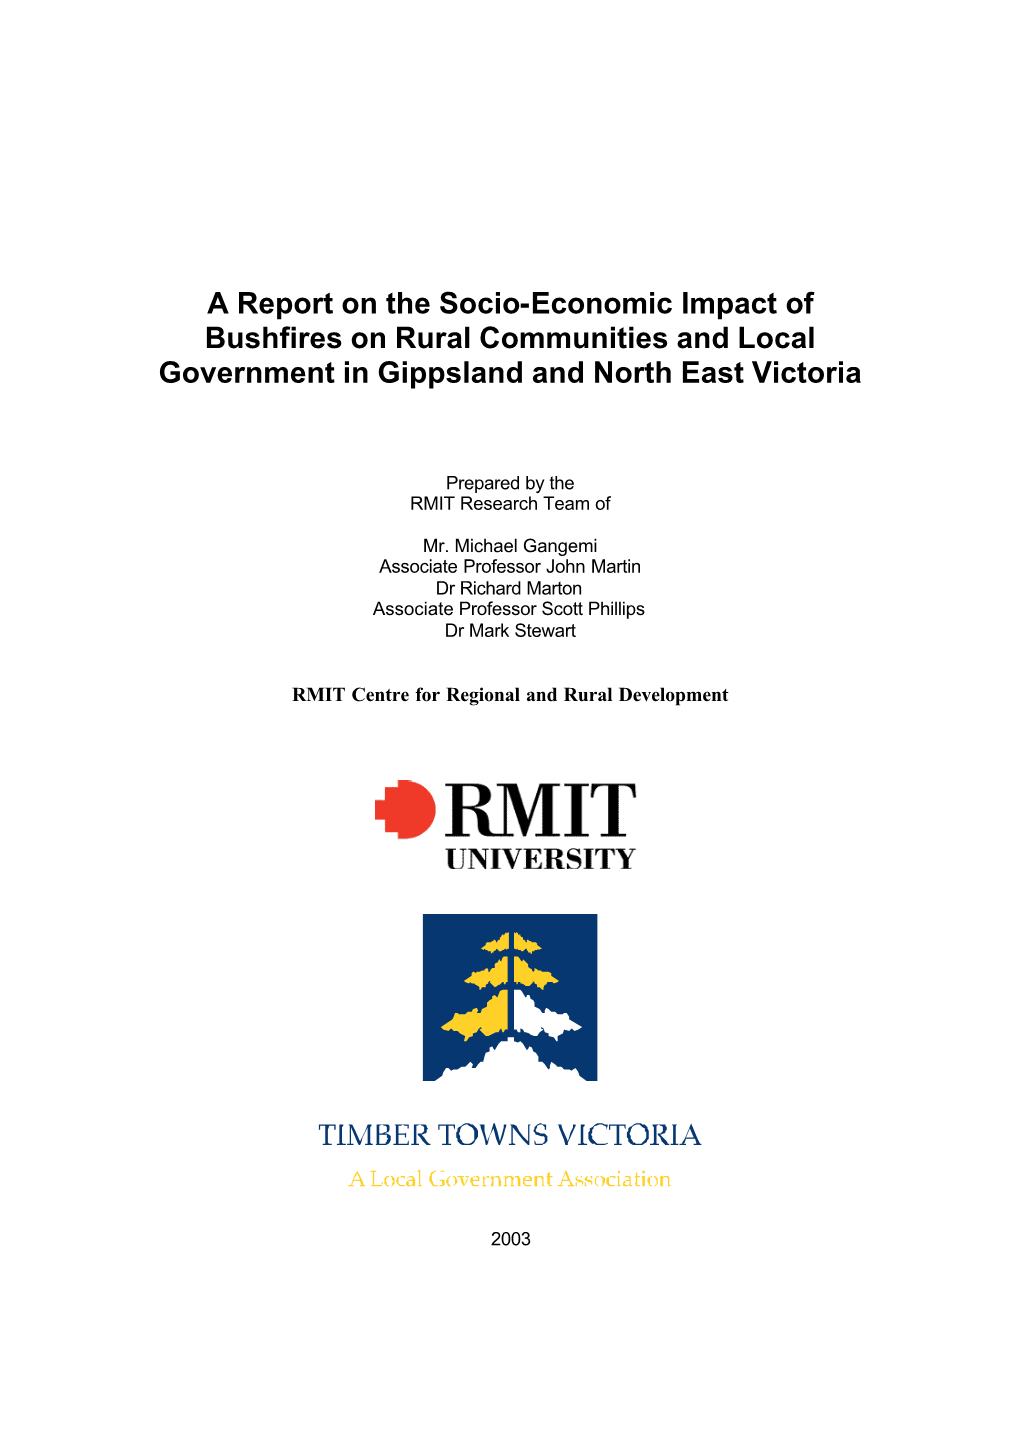 A Report on the Socio-Economic Impact of Bushfires on Rural Communities and Local Government in Gippsland and North East Victoria